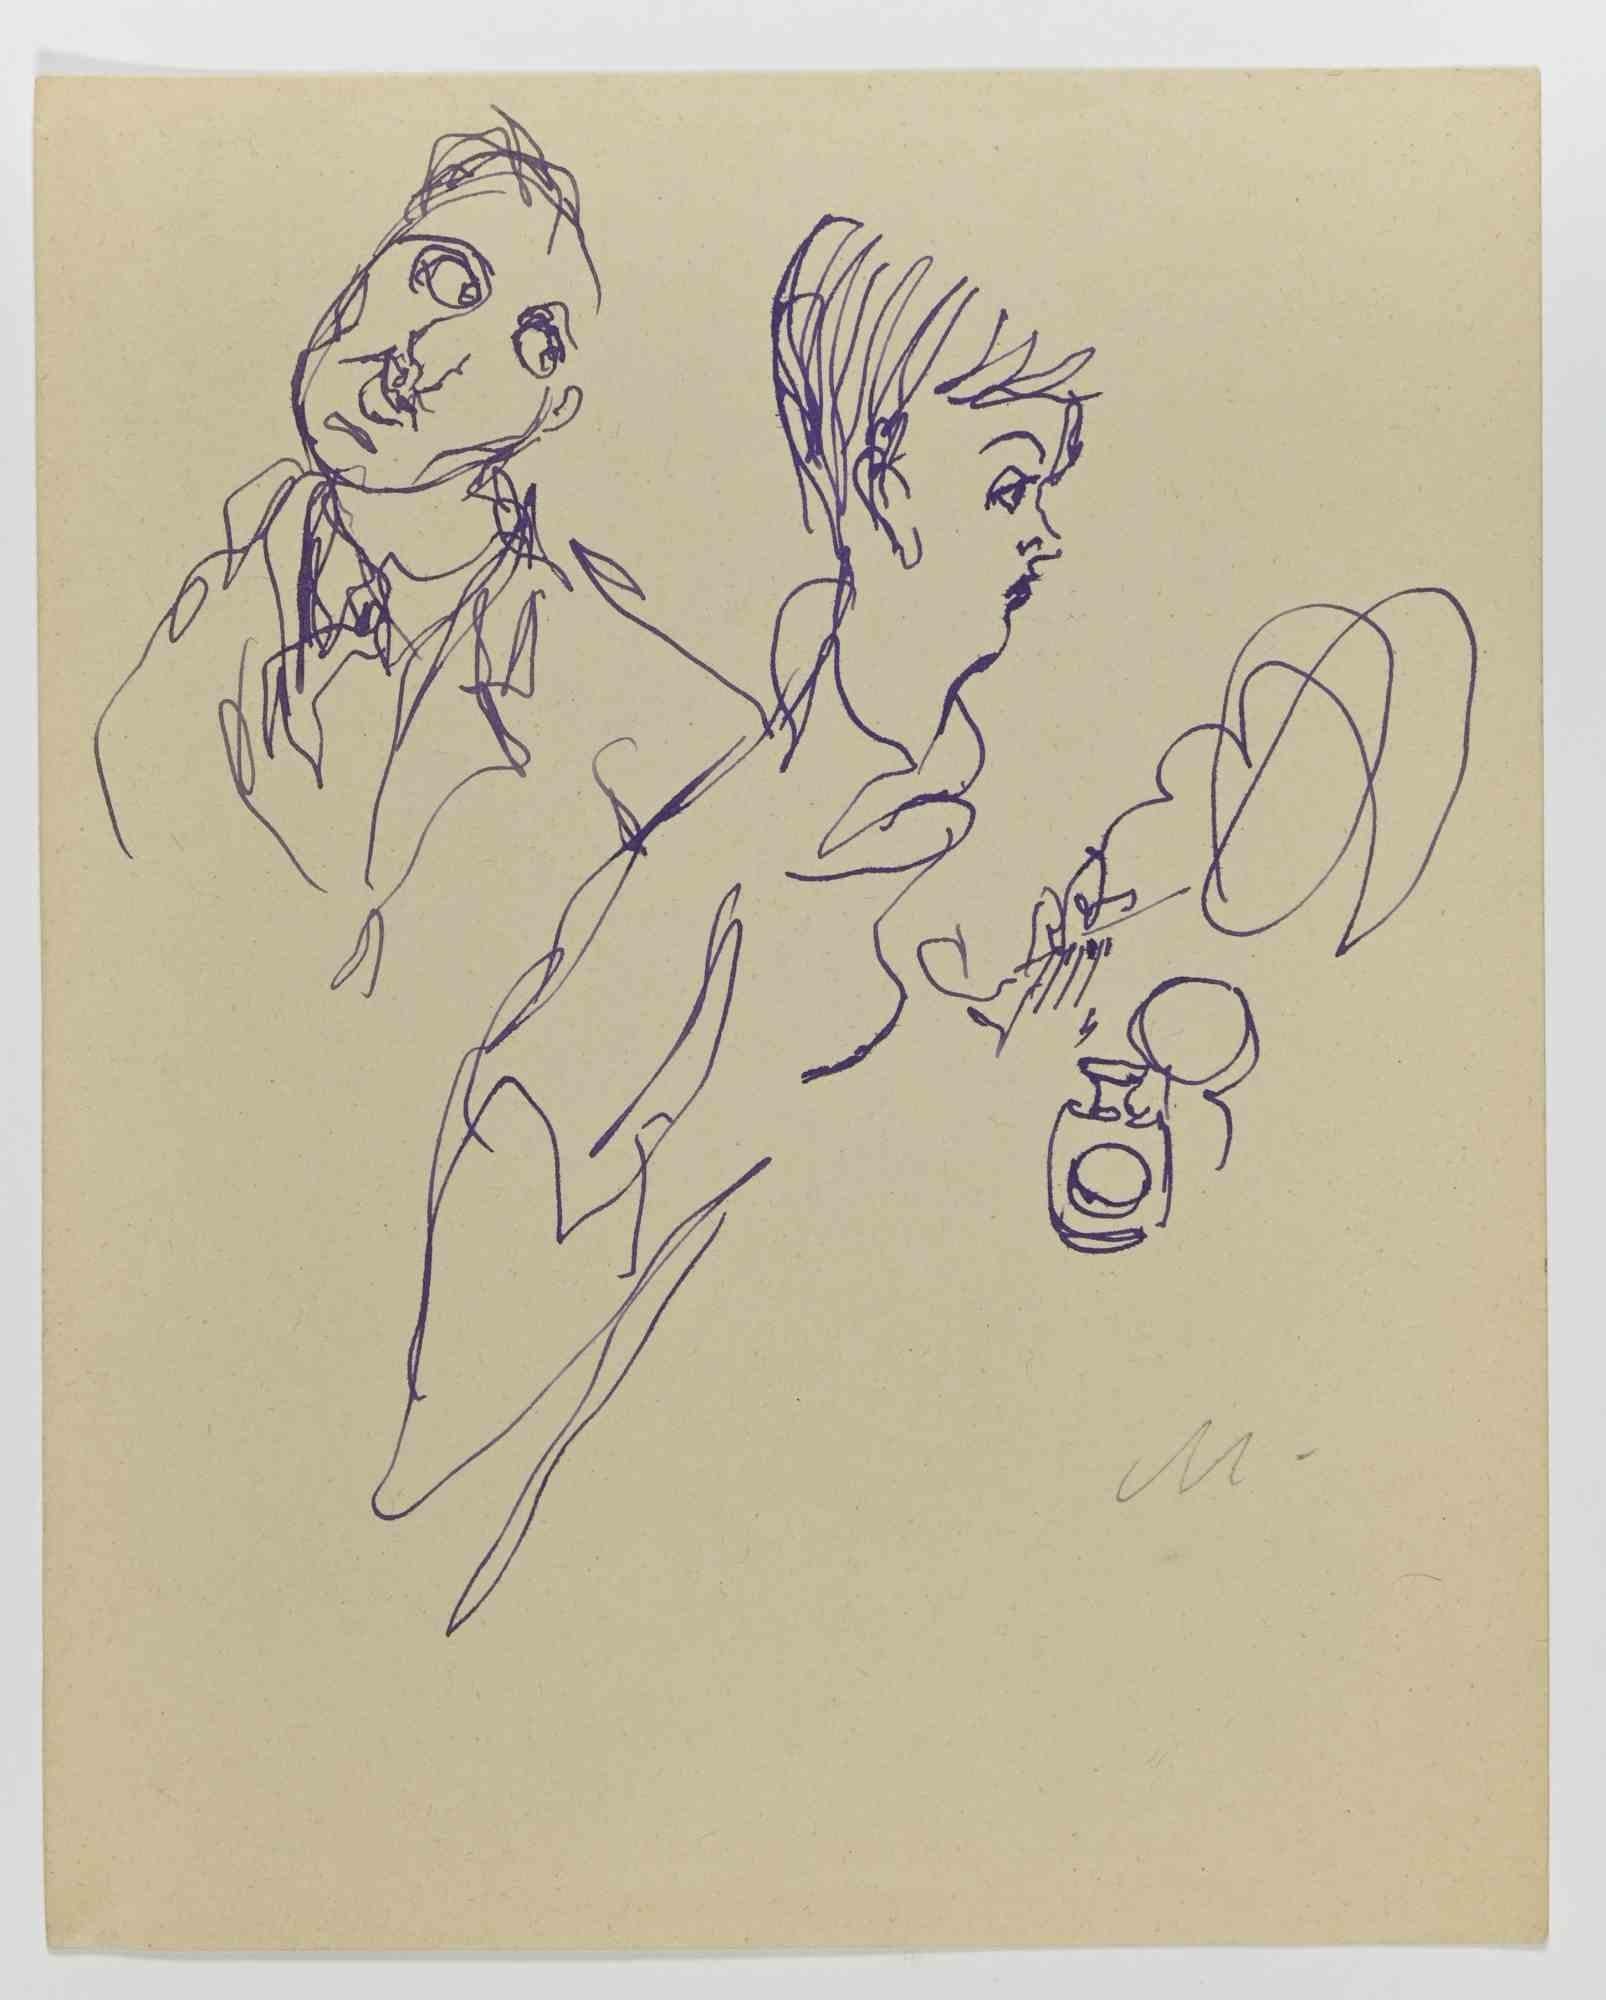 The Couple is a pen Drawing realized by Mino Maccari  (1924-1989) in 1945 ca.

Monogrammed on the lower margin.

Good conditions.

Mino Maccari (Siena, 1924-Rome, June 16, 1989) was an Italian writer, painter, engraver and journalist, winner of the